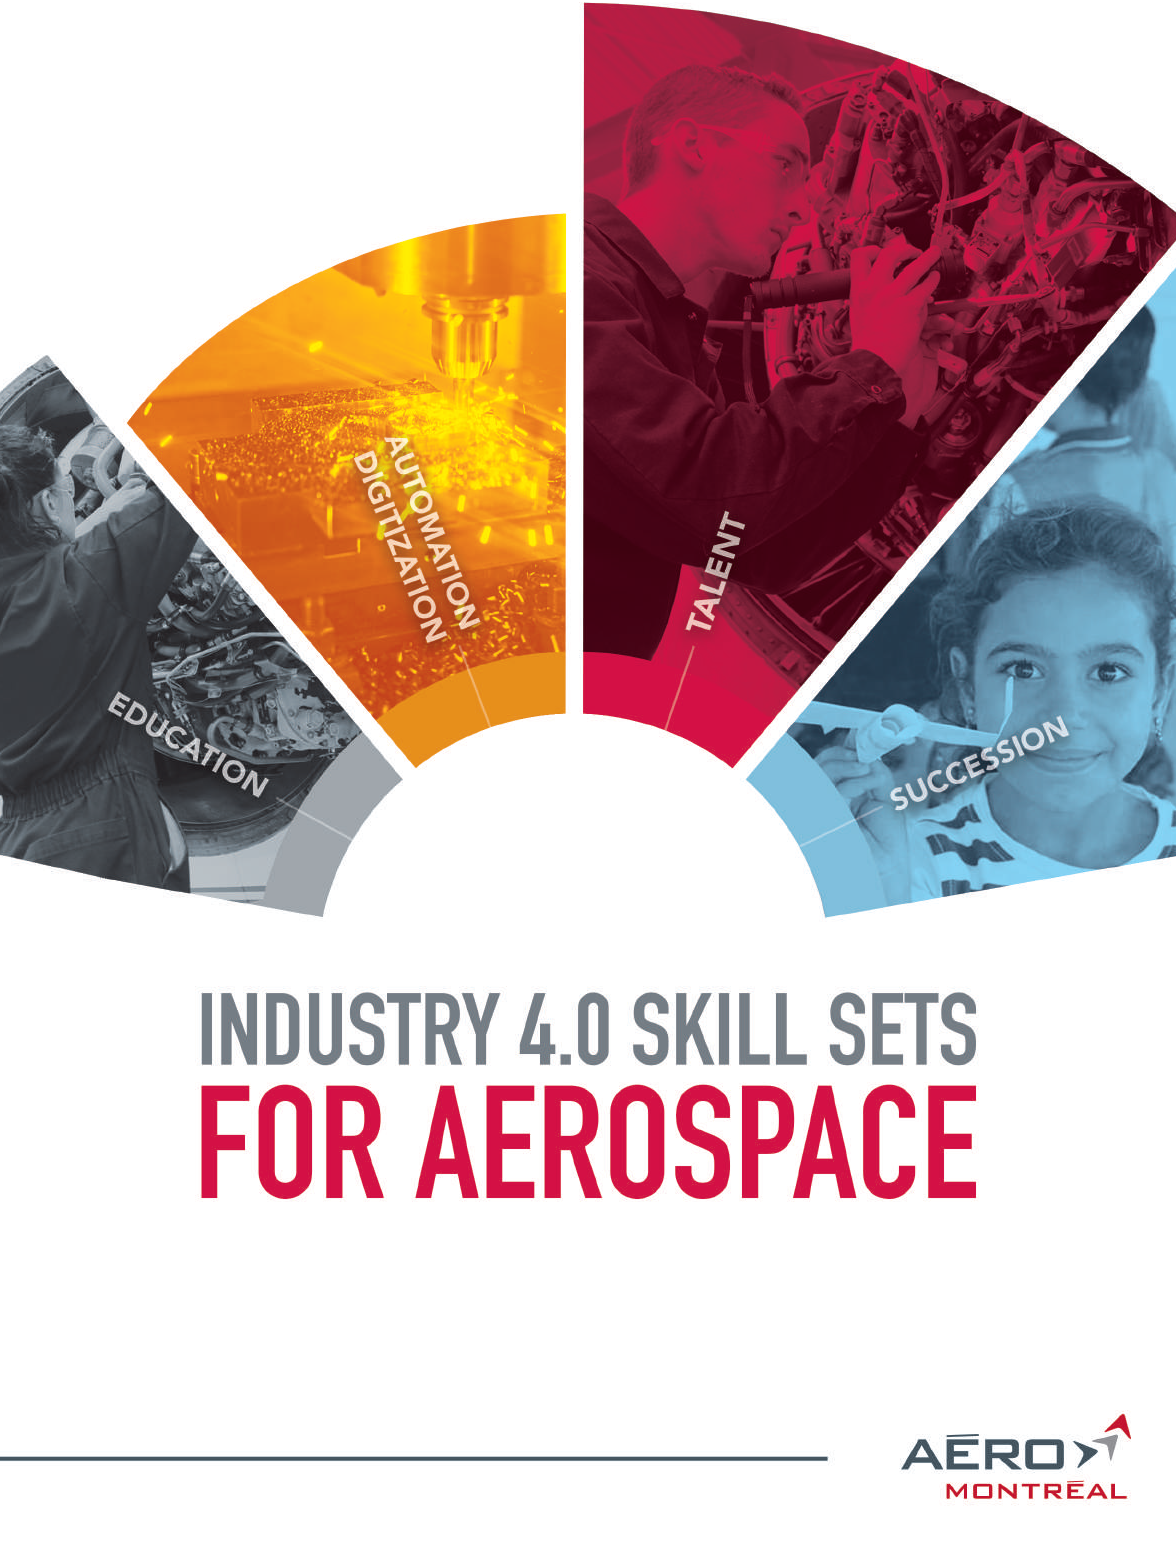 Industry 4.0 Skill Sets for Aerospace